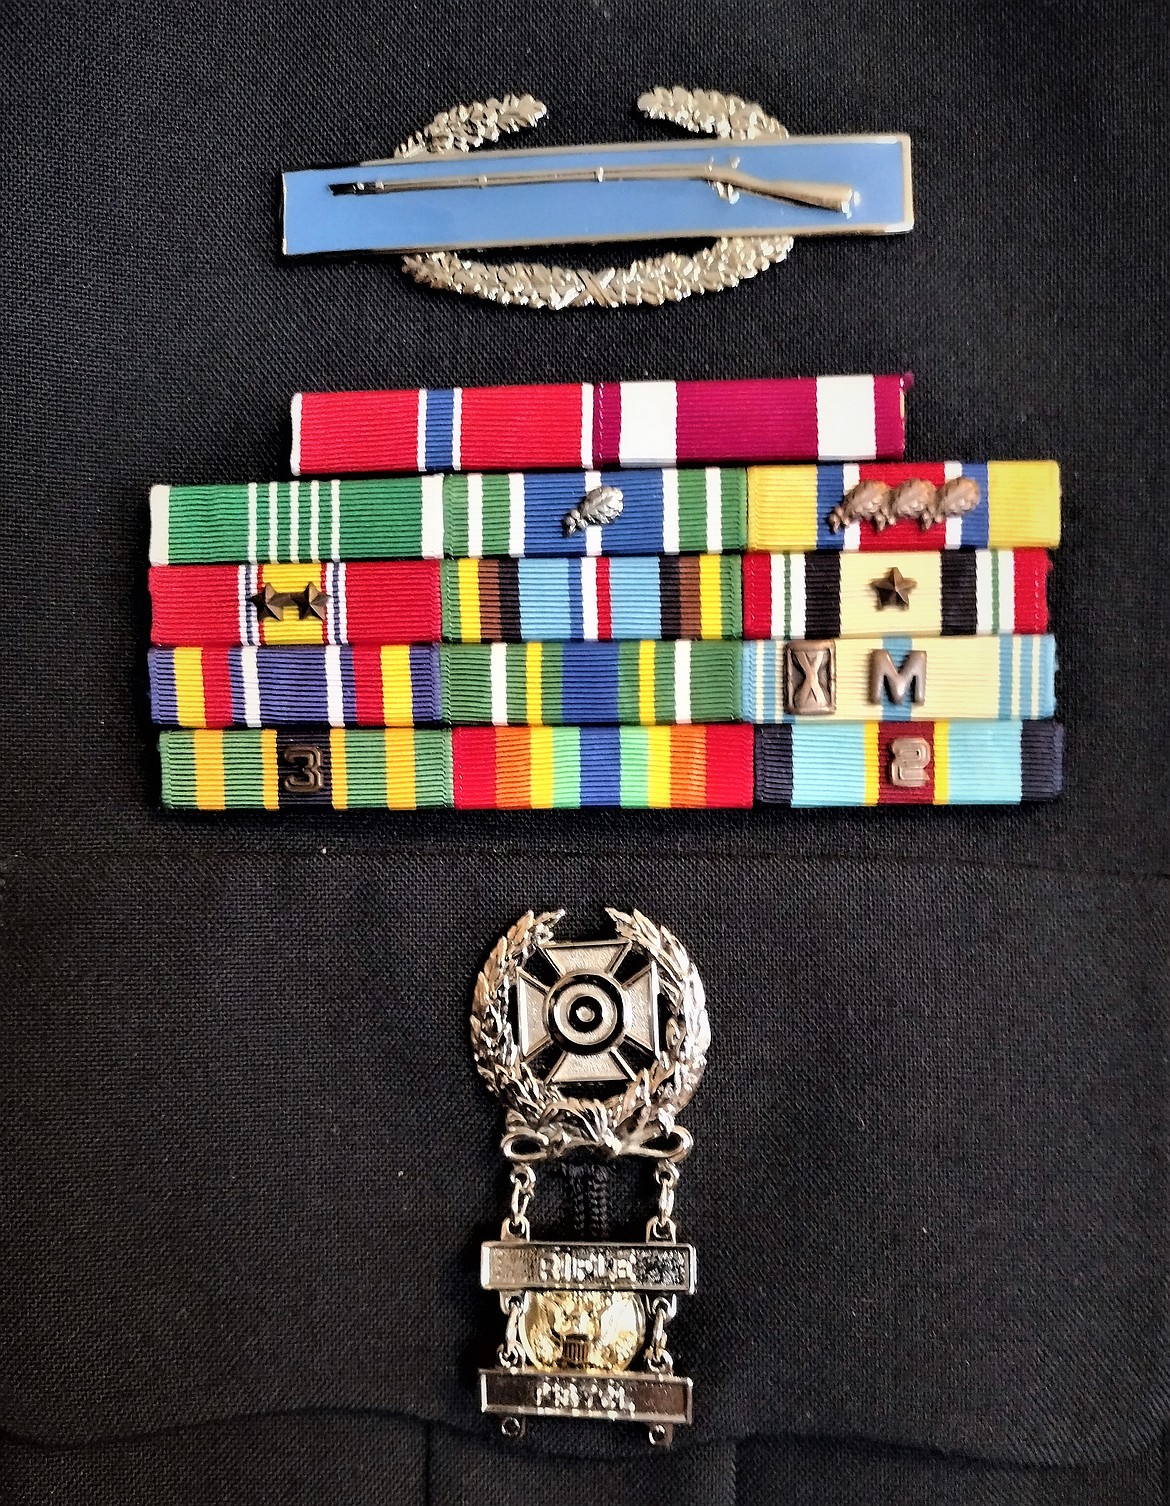 A ribbon rack adorns Jack Evensizer's uniform showing two awards of the NDSM (red and gold ribbon with two service stars) in the middle row, left side.